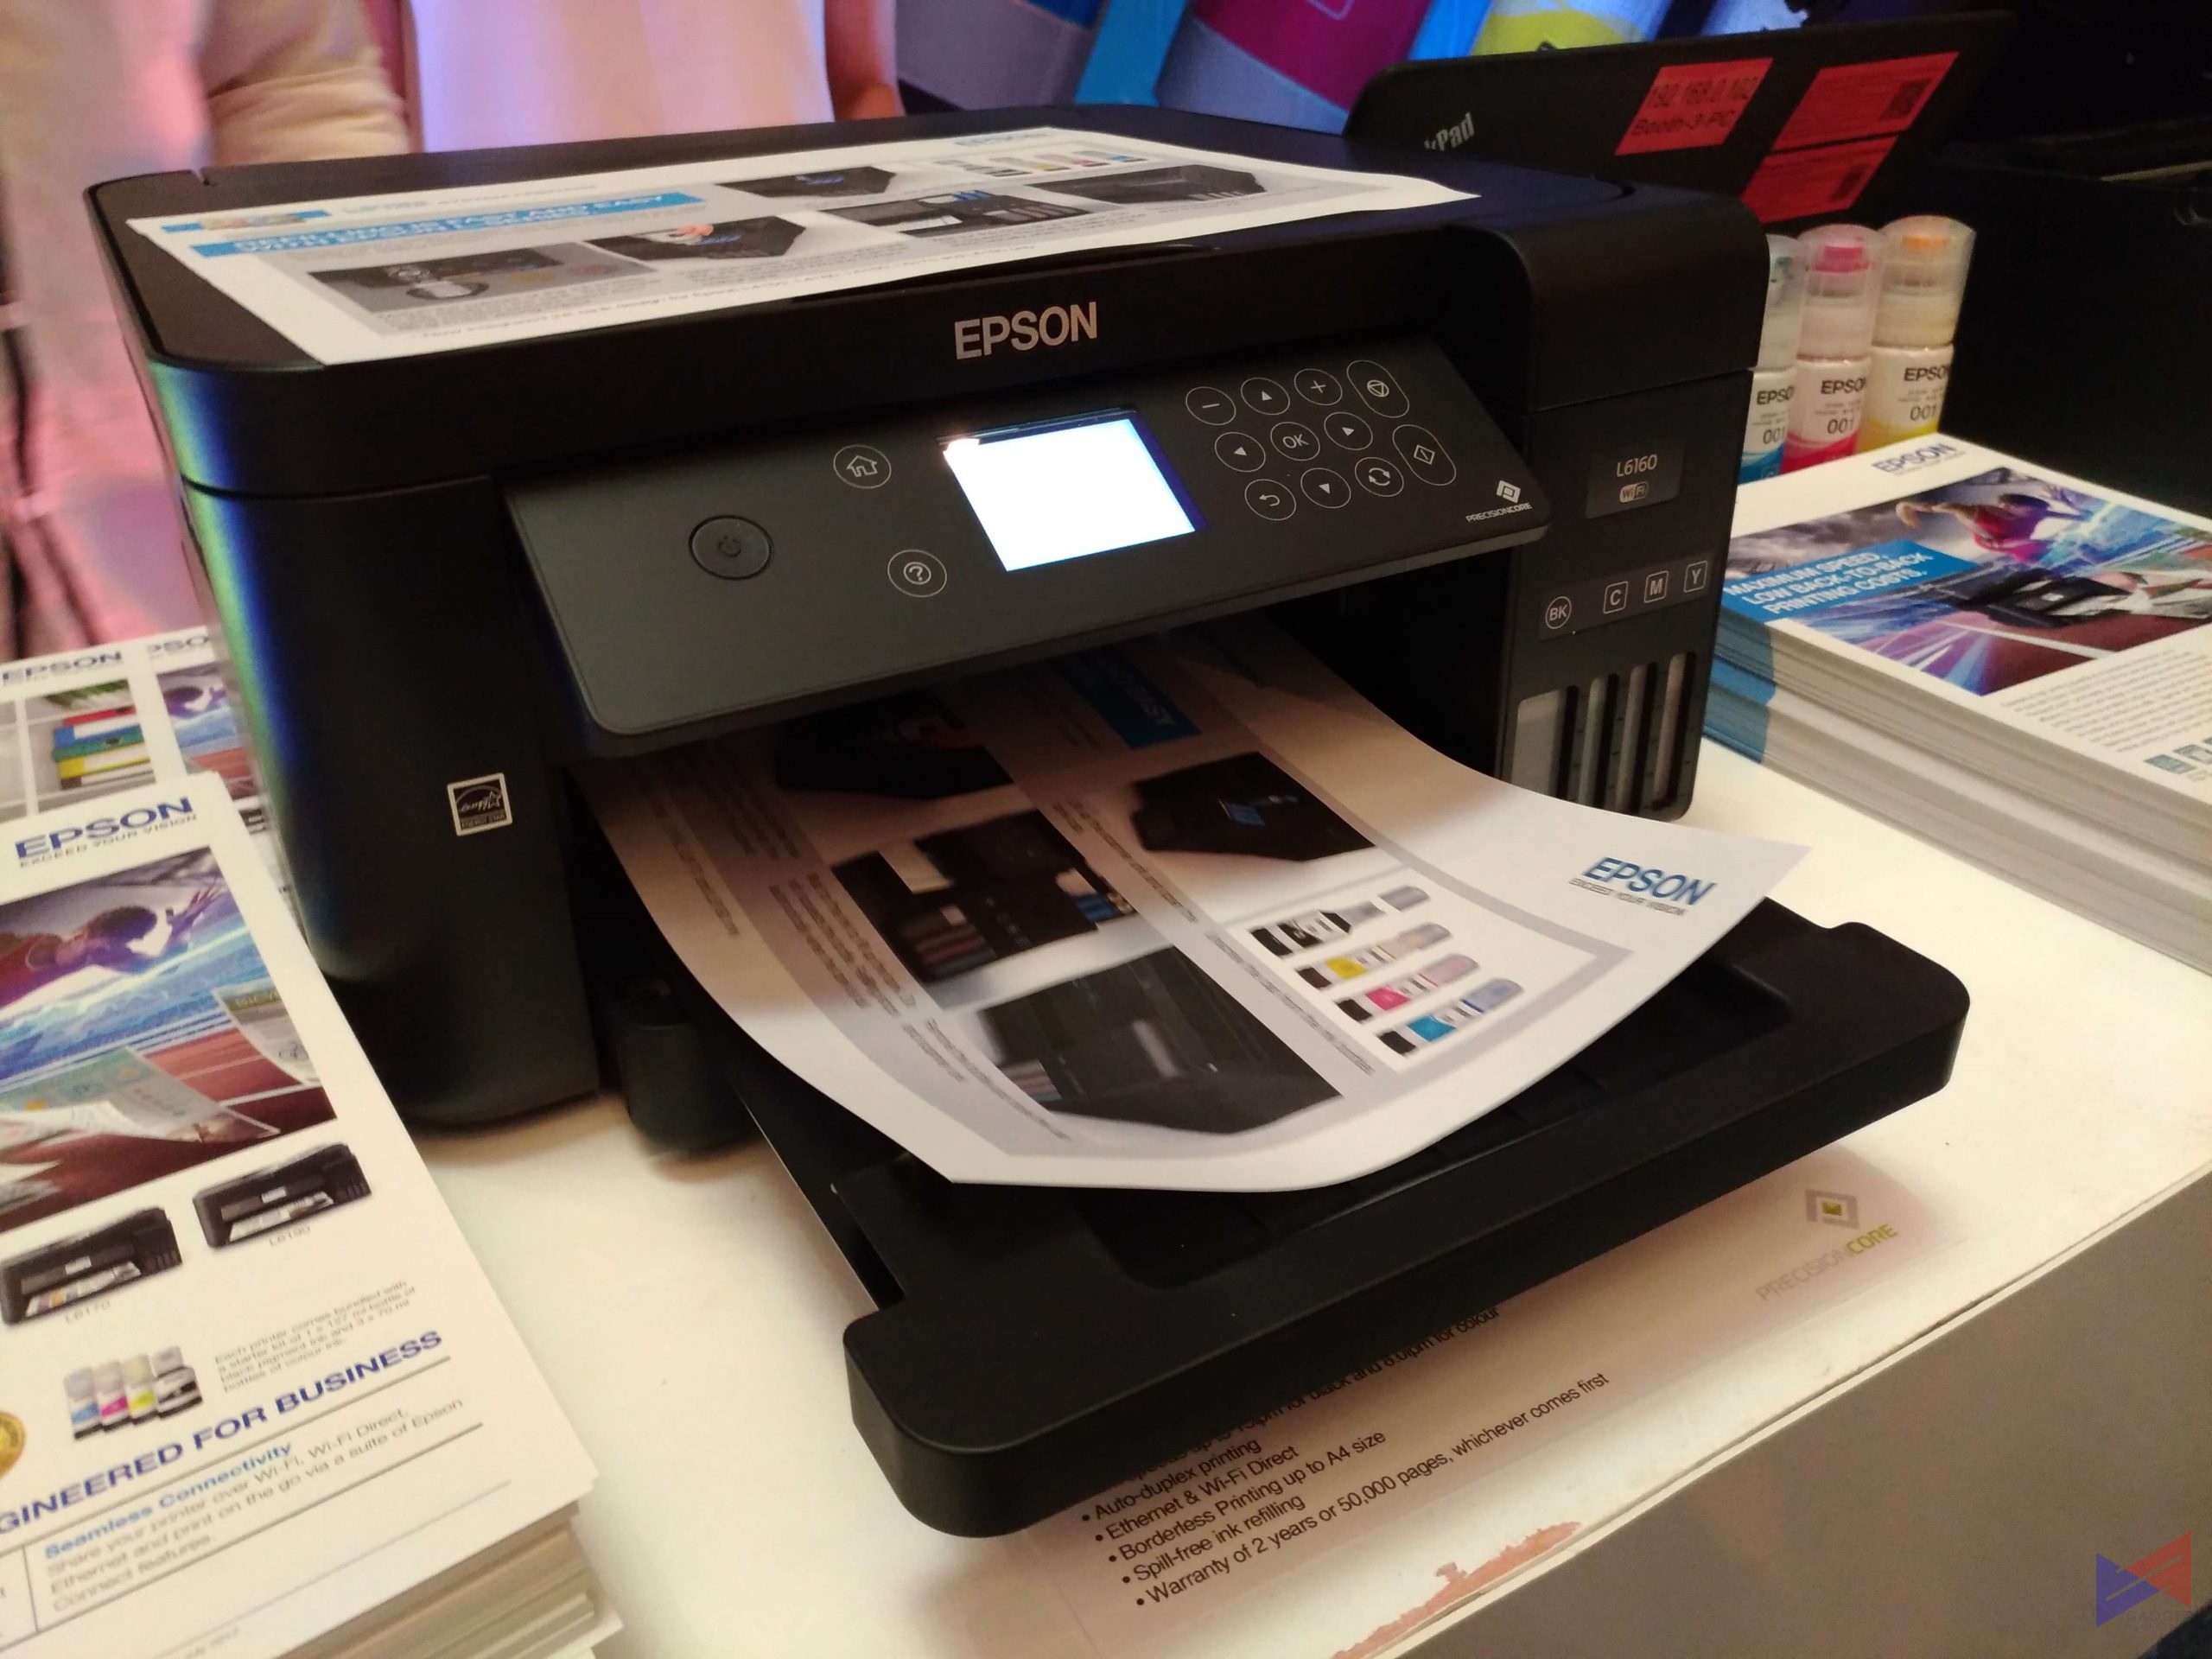 Epson Empowers Businesses Through Innovative Products